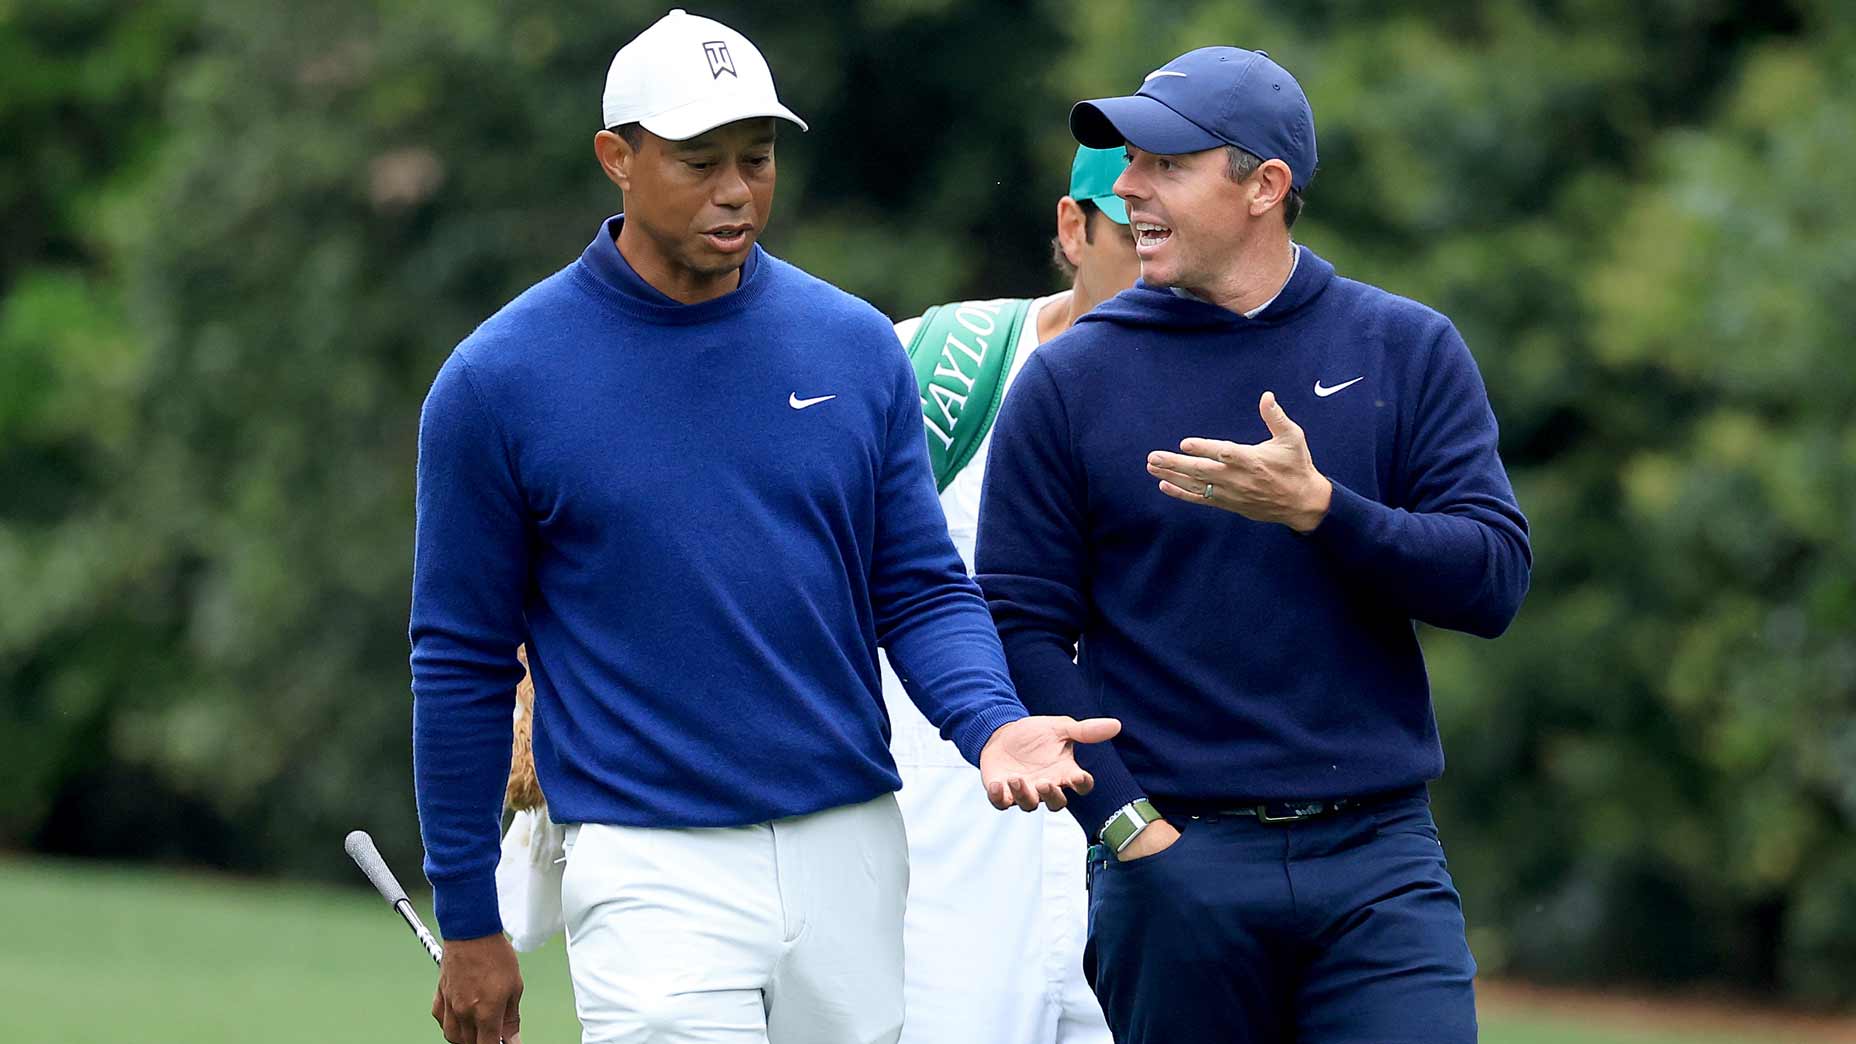 Tiger Woods and Rory McIlroy as LIV Golf captains? Apparently it was ...